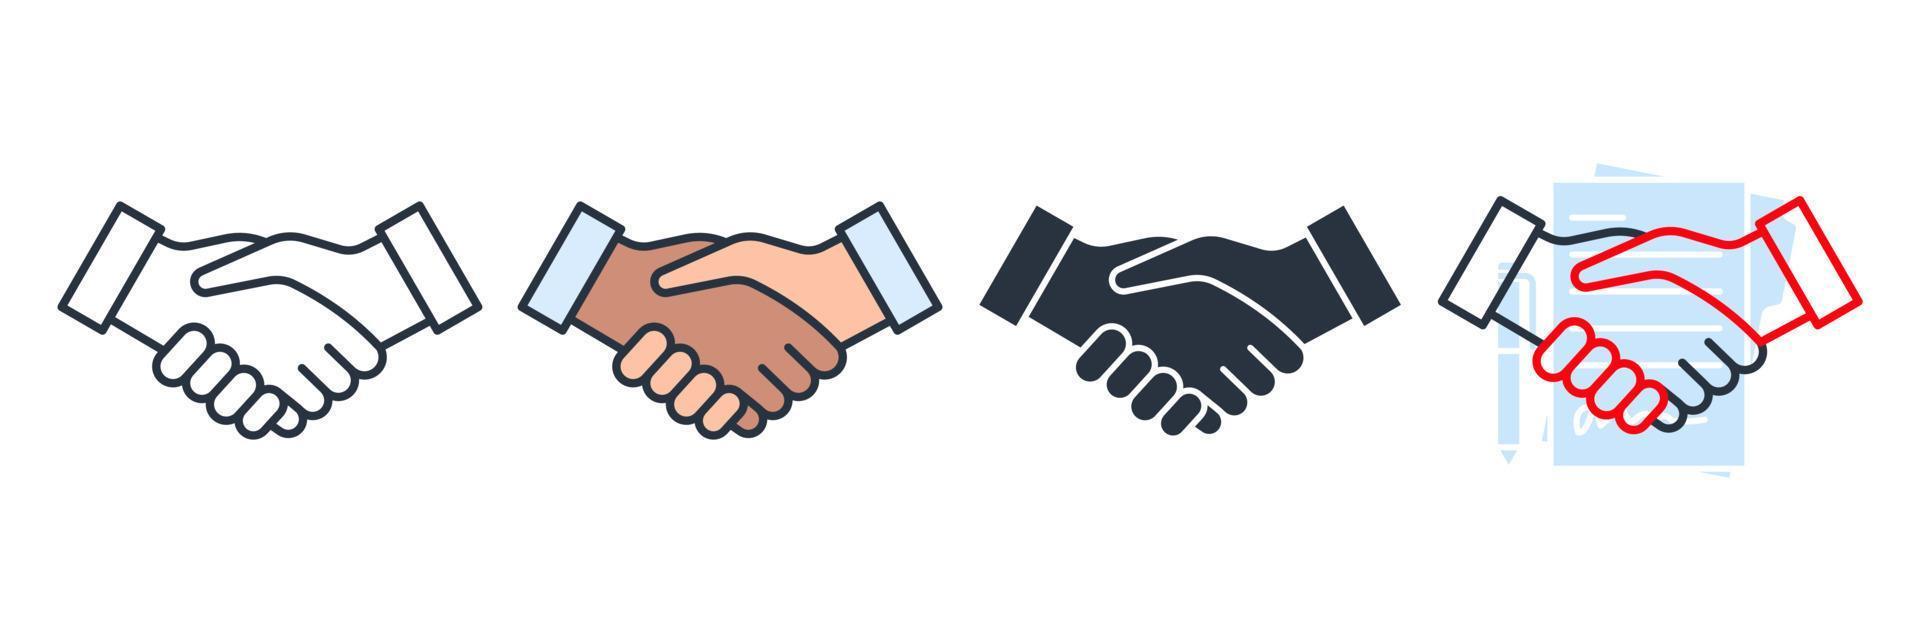 handshake icon logo vector illustration. contract agreement symbol template for graphic and web design collection